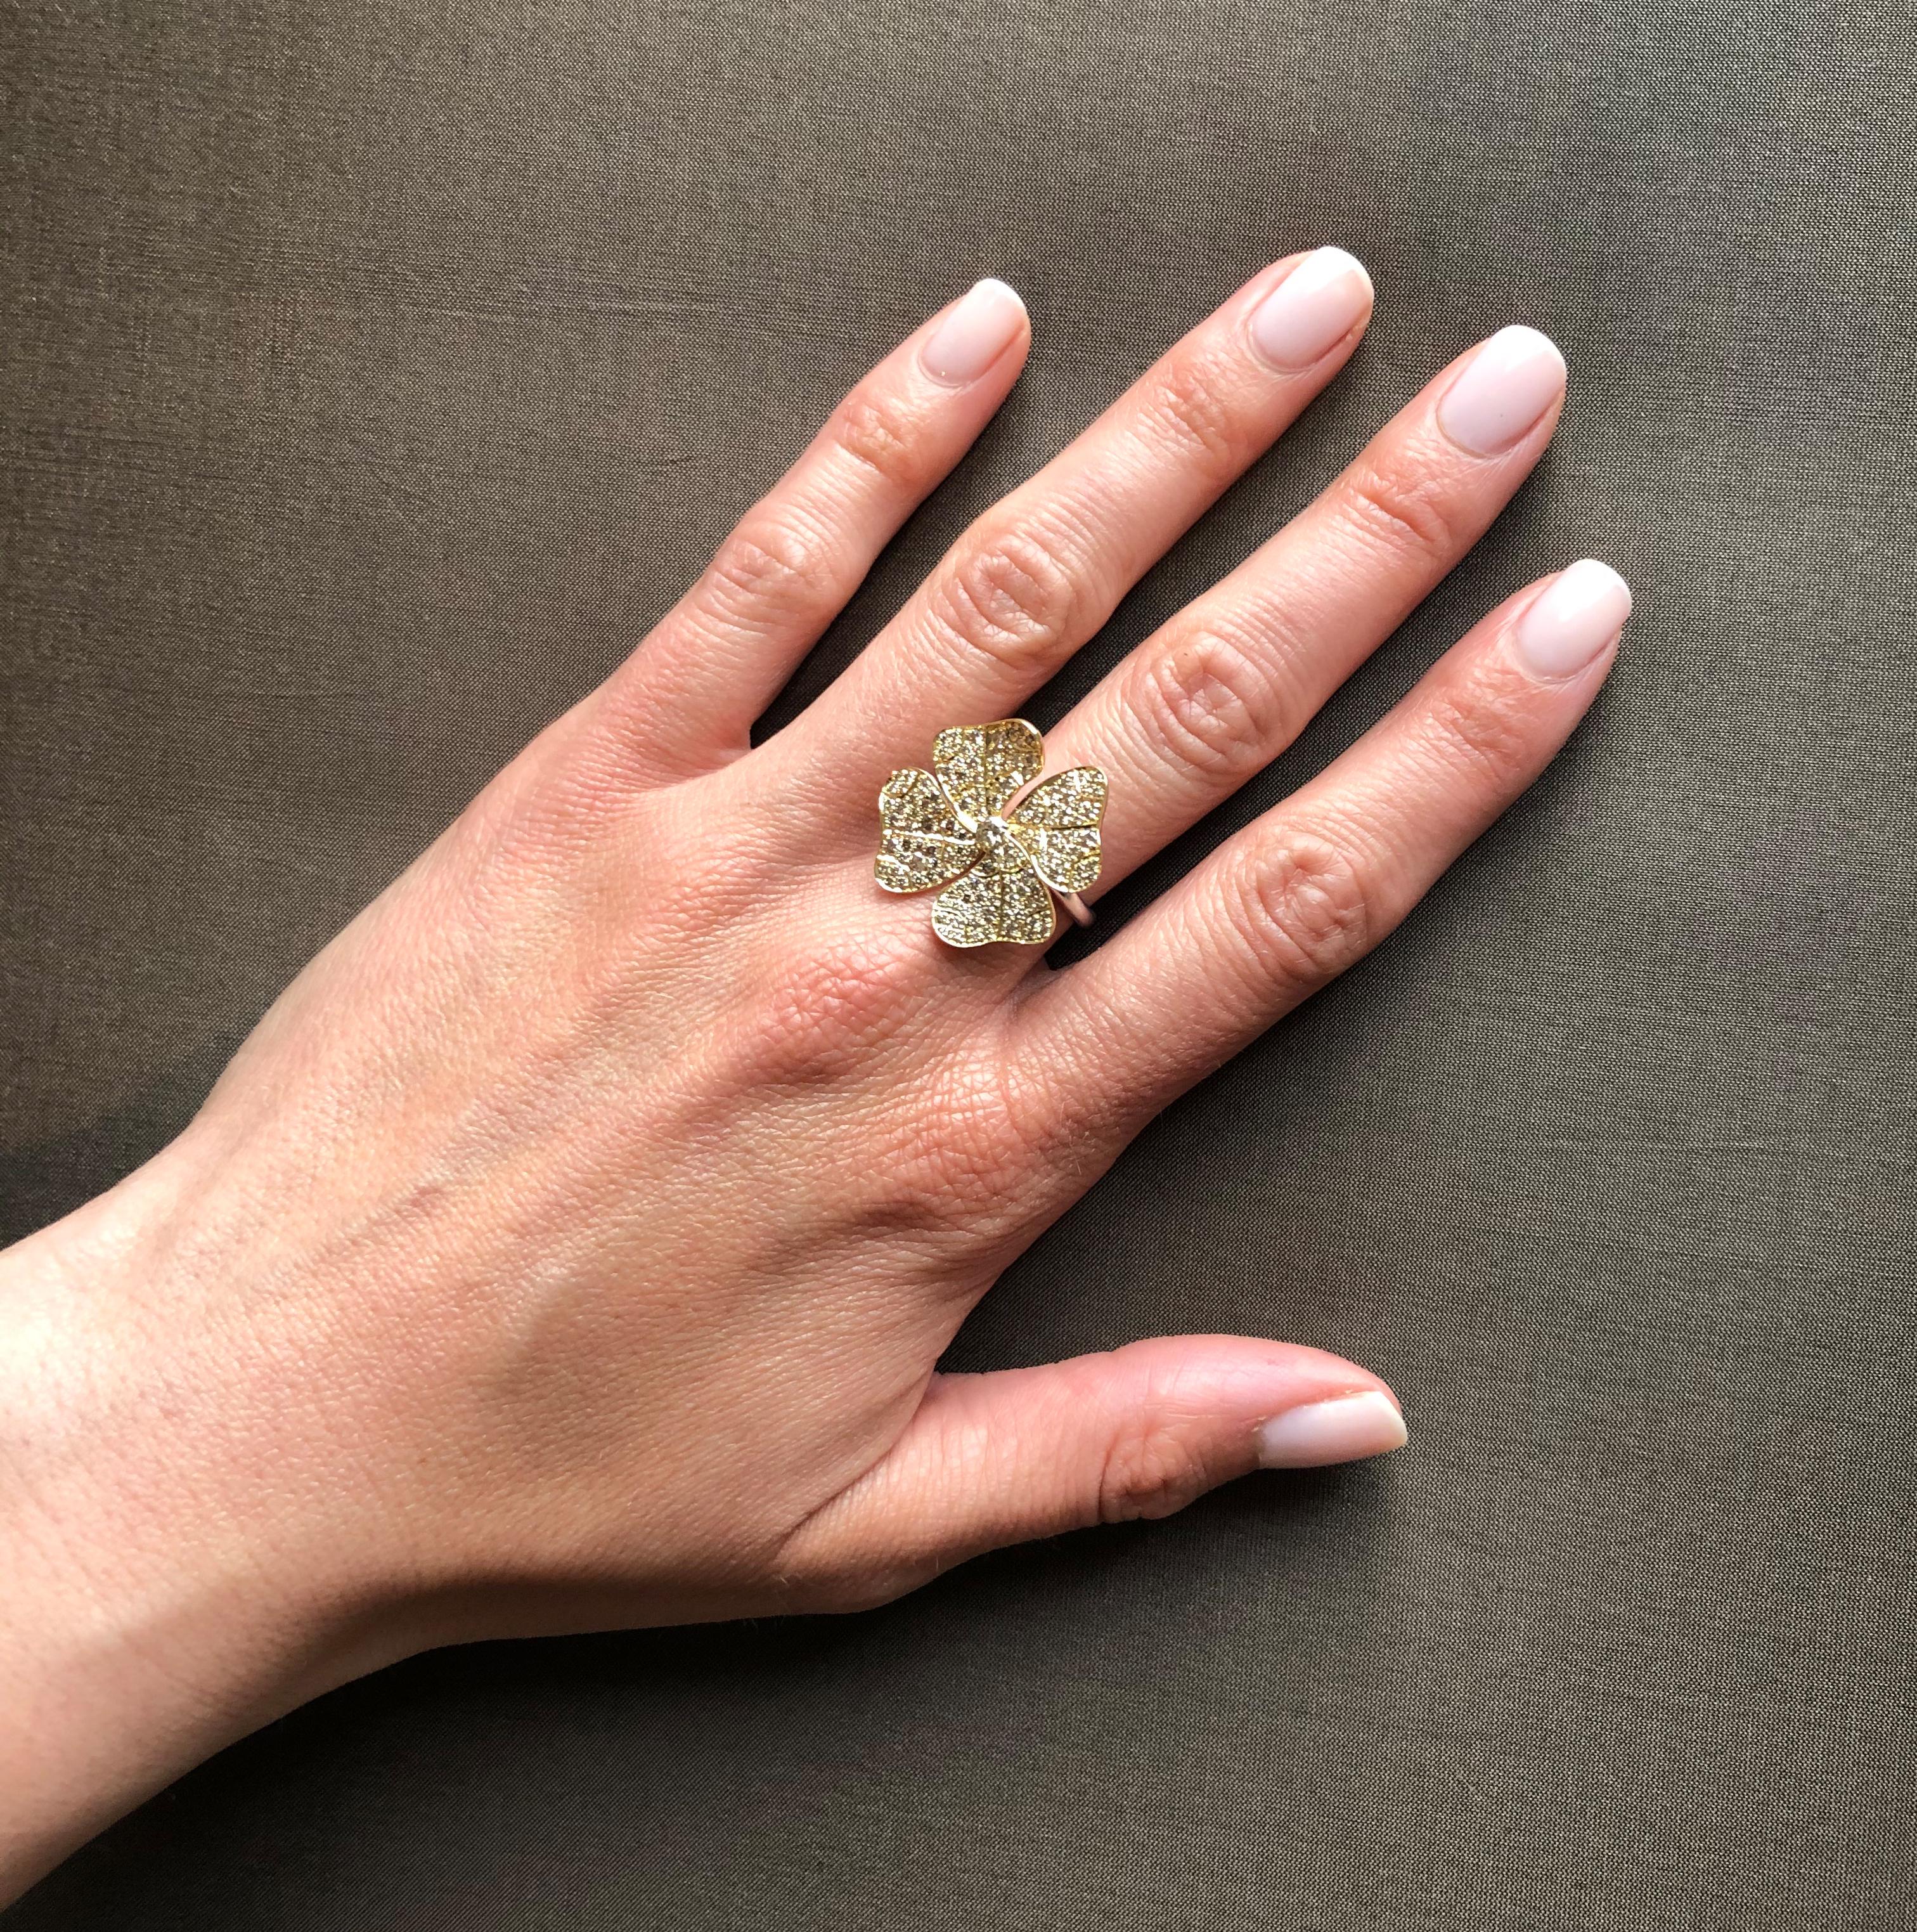 This beautiful Clover Ring goes super well with any type of attire. The fancy brown diamonds are attractive and super sparkling, but understatement at the same time. If it is a Dinnerparty or just picking up the kids from school - the ring fits any 